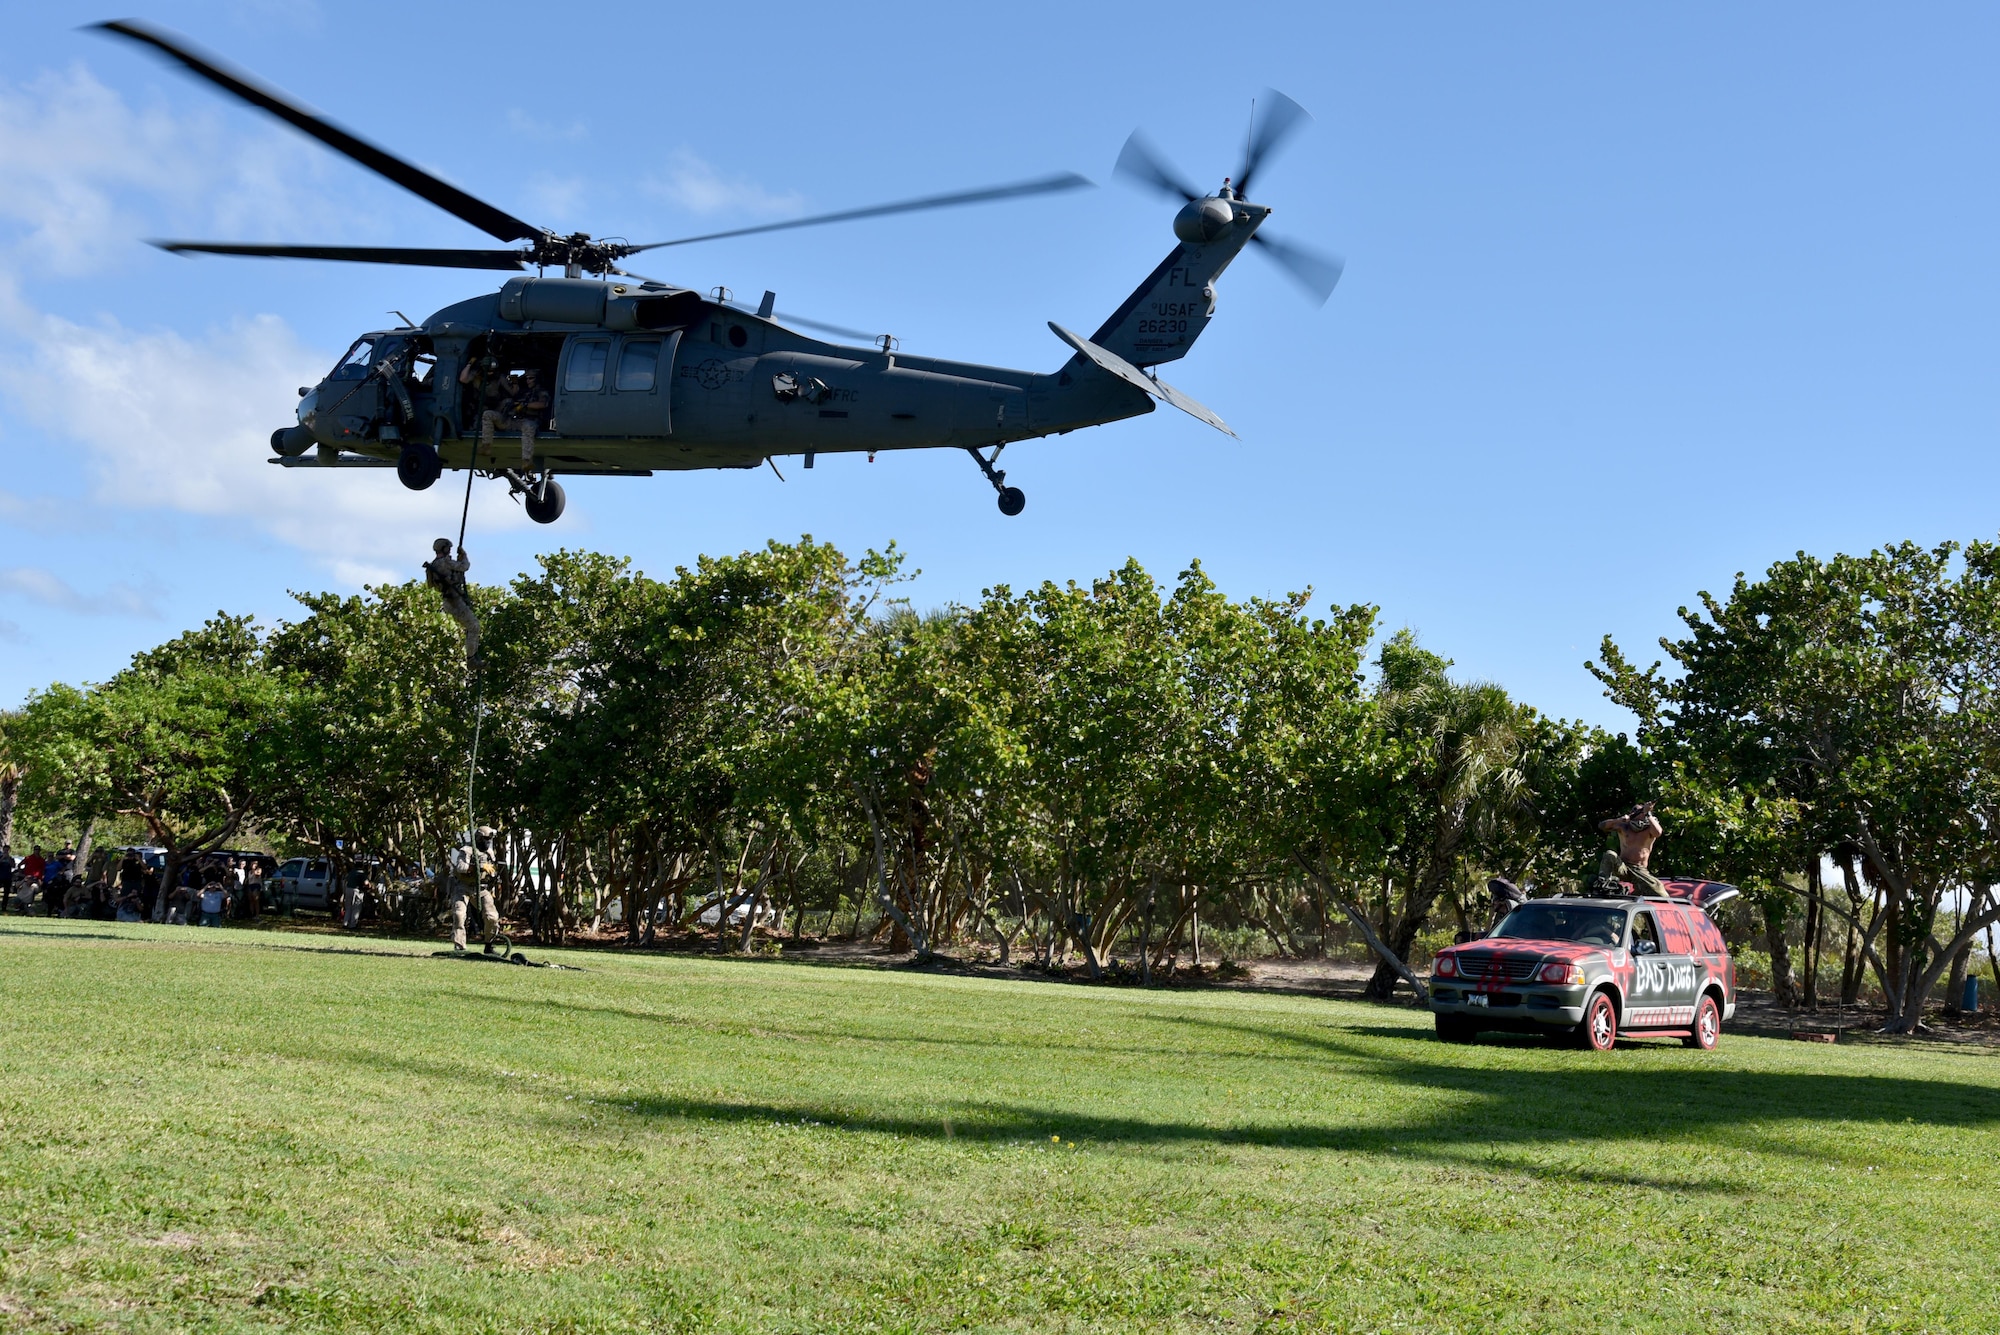 301st Rescue Squadron tactical demonstration at the 32nd Annual Muster and Music Festival Nov. 3